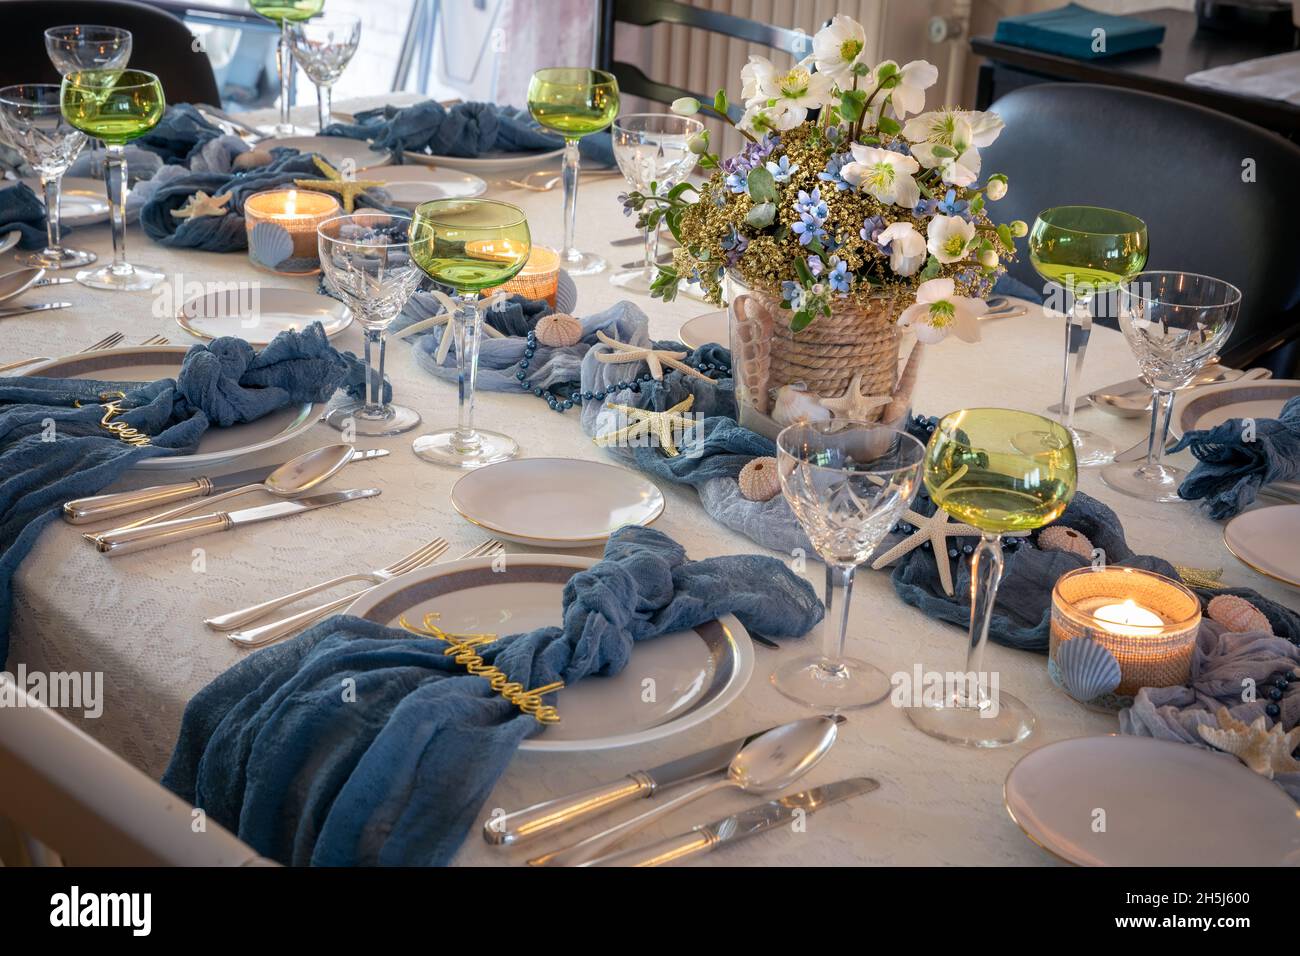 https://c8.alamy.com/comp/2H5J600/christmas-dinner-table-decorations-in-blues-and-gold-following-a-beach-theme-with-seashells-and-starfish-2H5J600.jpg